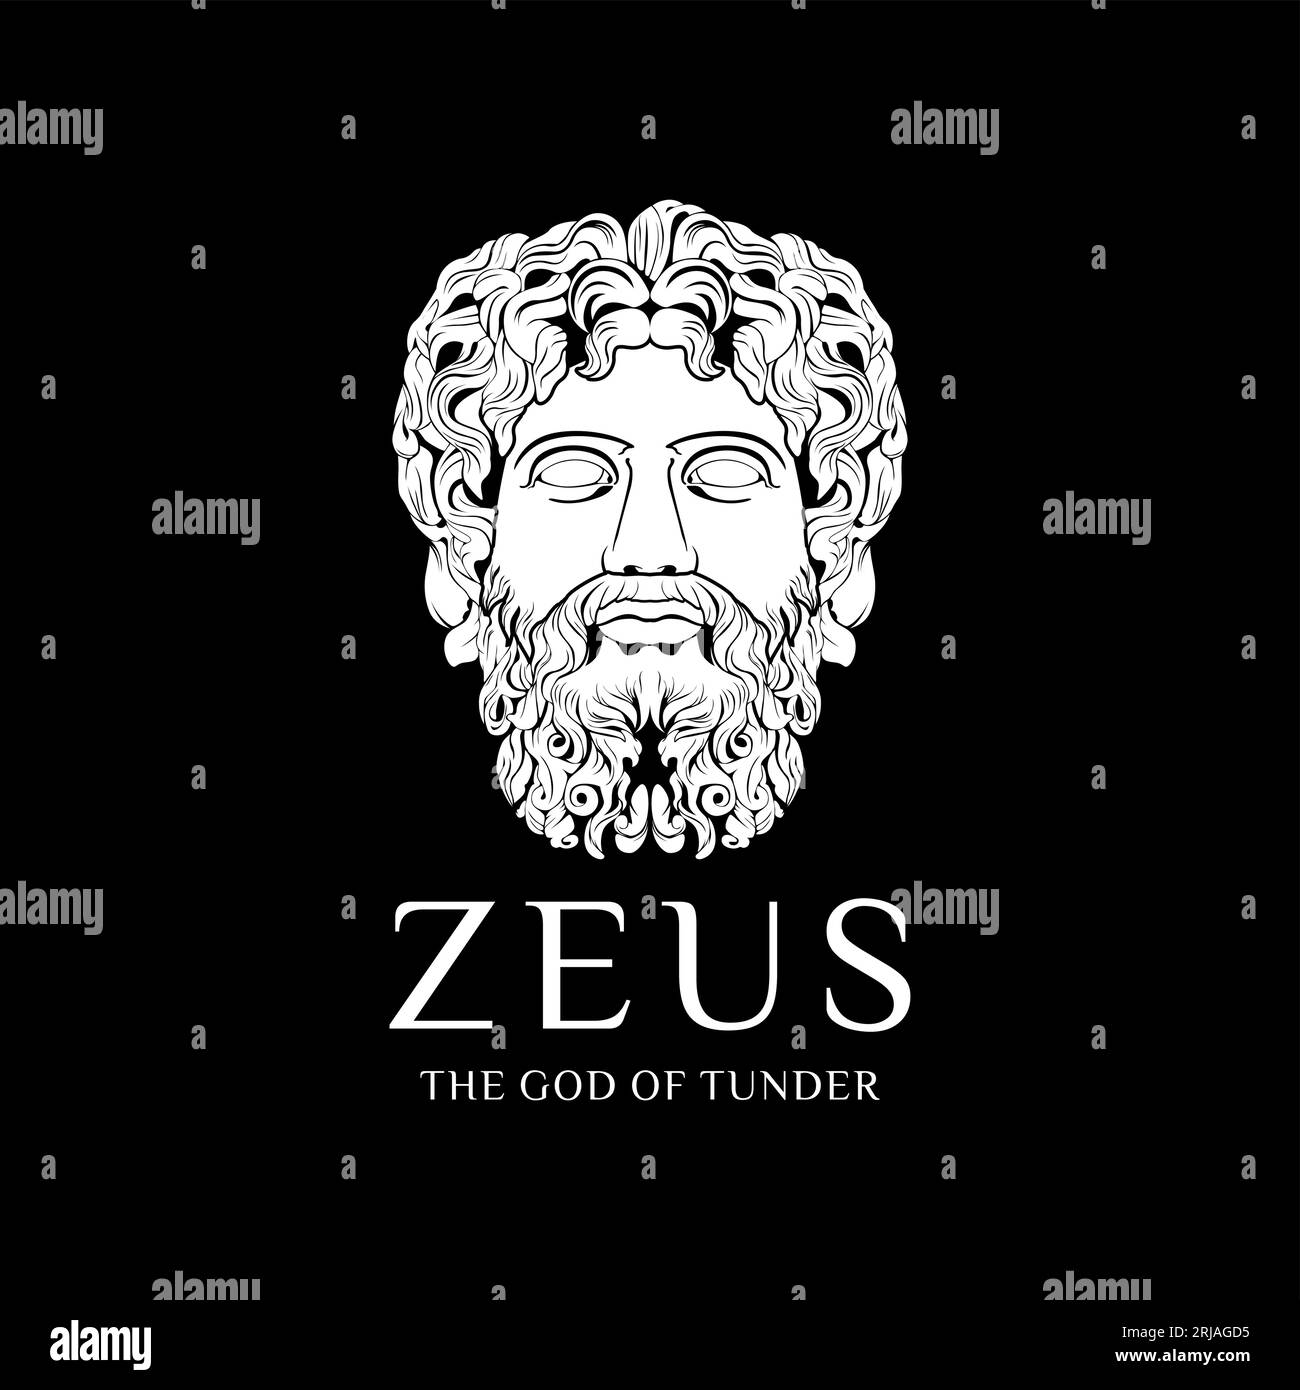 Zeus Face Vector Ancient Greek Godlike Old Man Statue With Beard and Mustache logo design Stock Vector